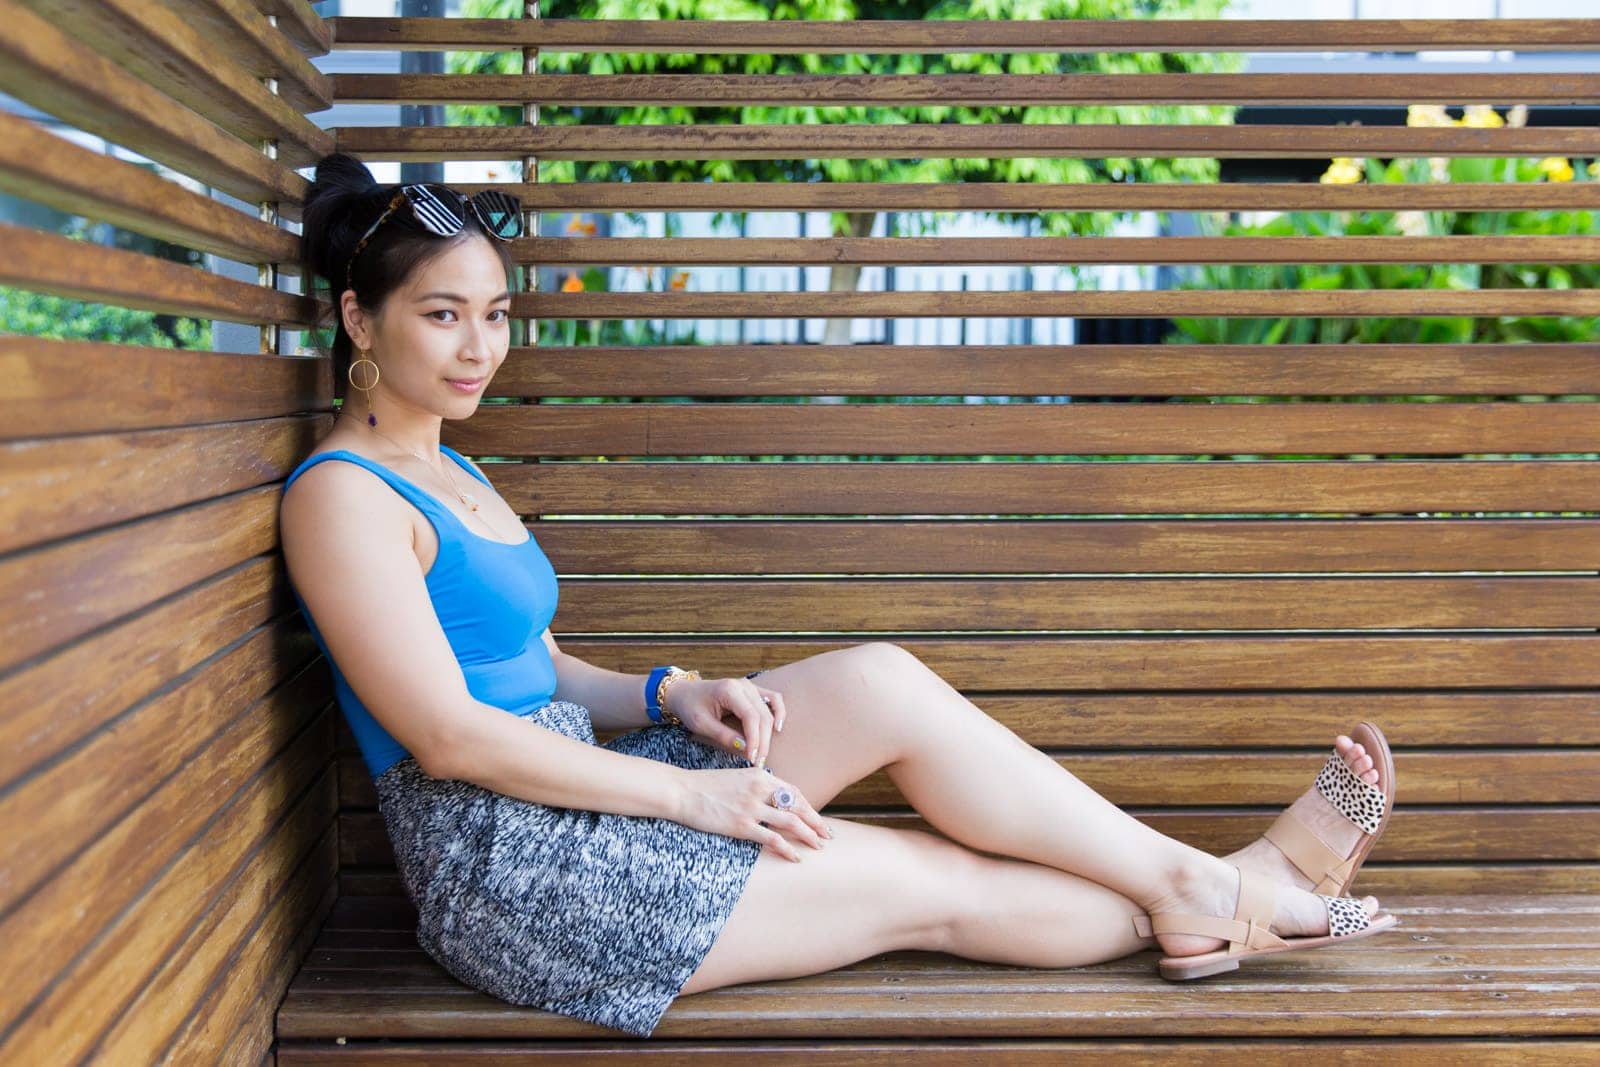 A woman sitting in a wooden cabana, she is wearing a blue sleeveless bodysuit and a black and white textured skirt. Her gaze is away from the camera.